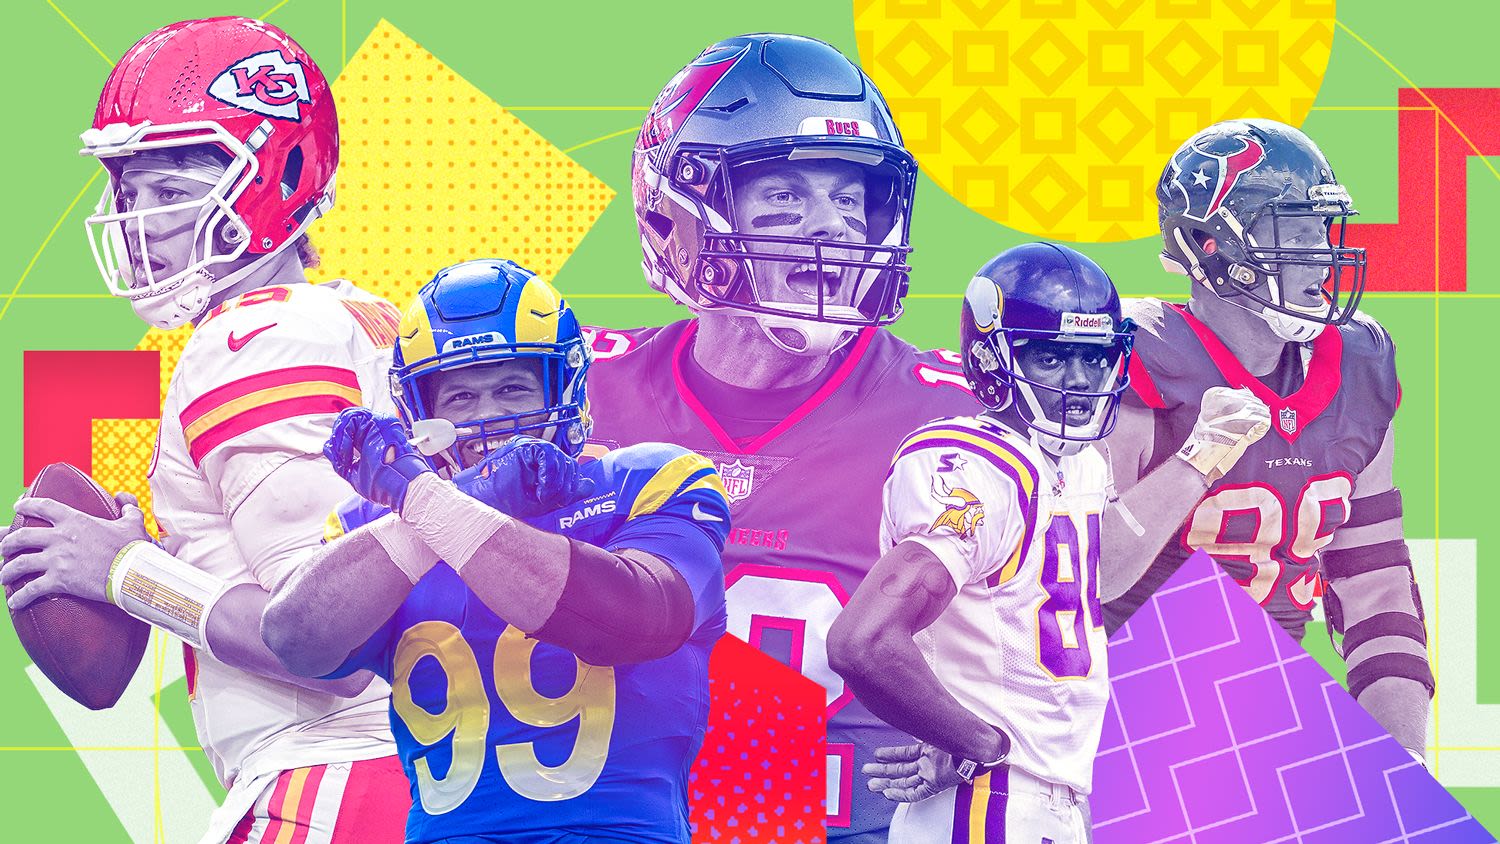 Ranking the top 25 NFL players of the 21st century: Where do Brady, Donald, Moss land?